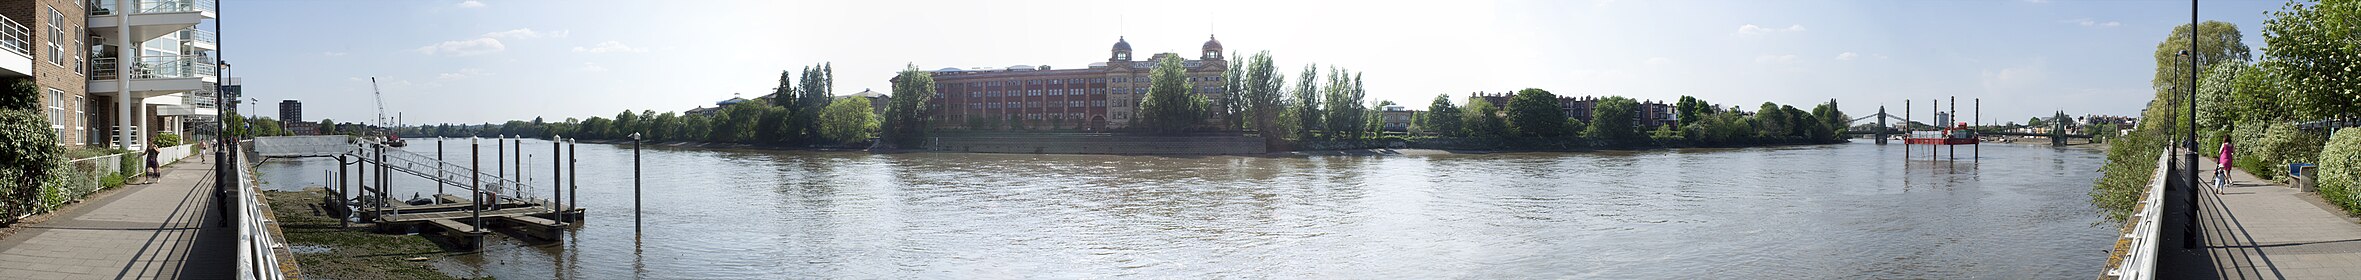 A panoramic view looking of the Thames at Hammersmith, opposite the Harrods Repository.